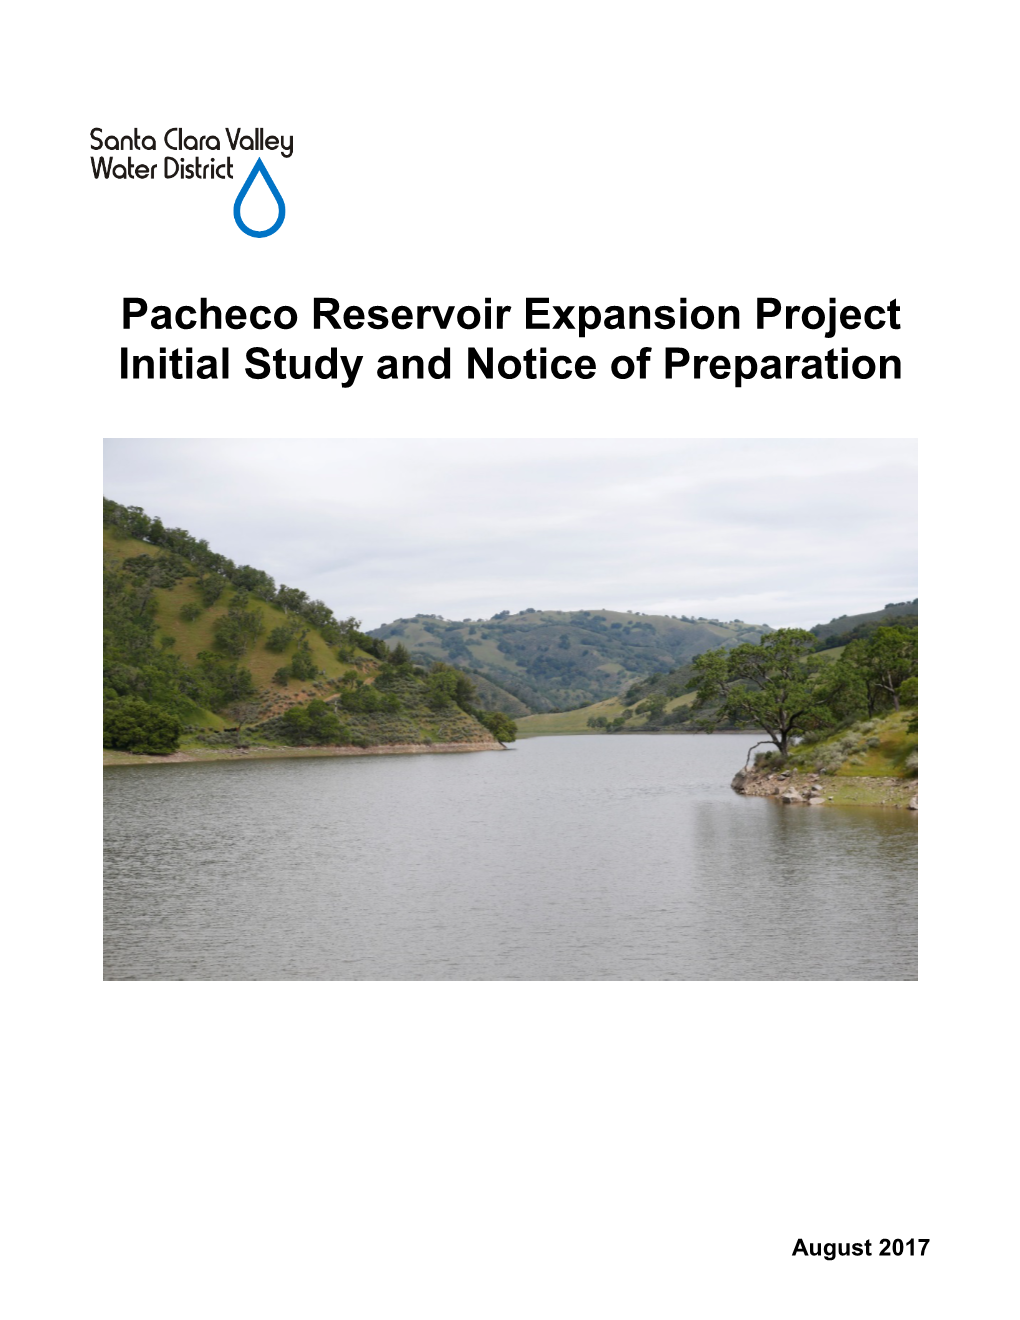 Pacheco Reservoir Expansion Project Initial Study and Notice of Preparation